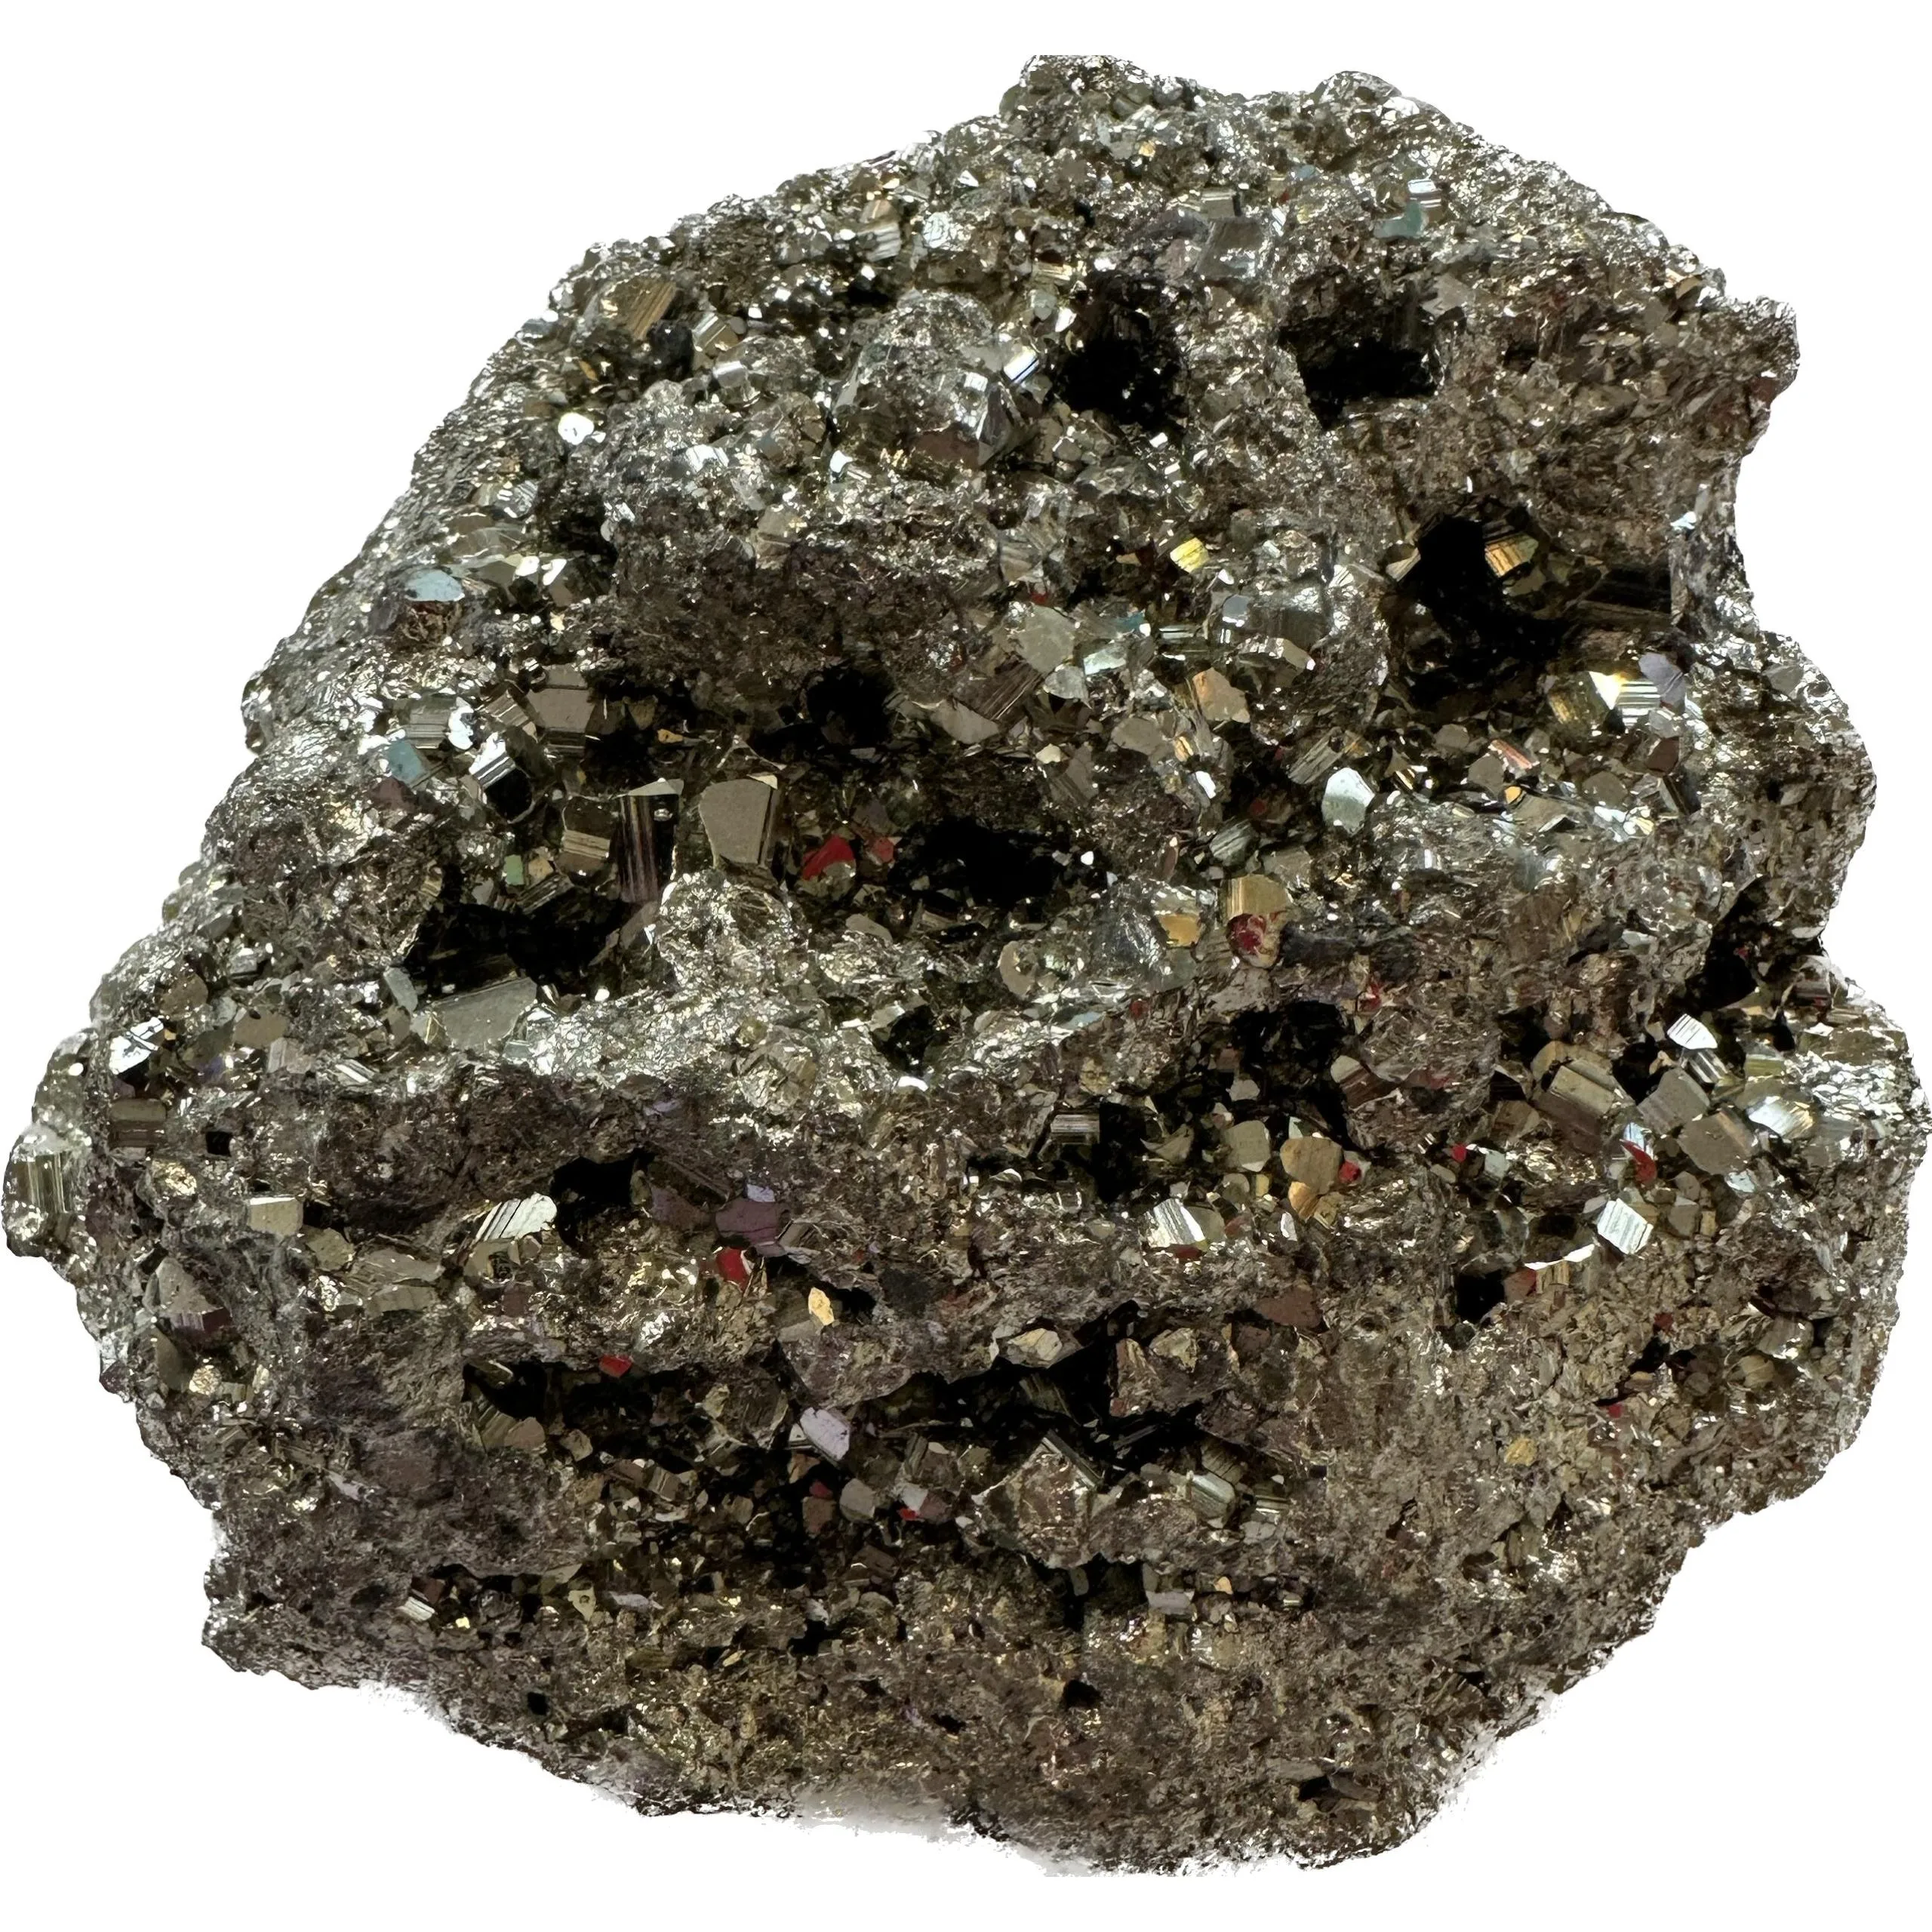 Fool’s gold, Pyrite Cluster, Large Prehistoric Online